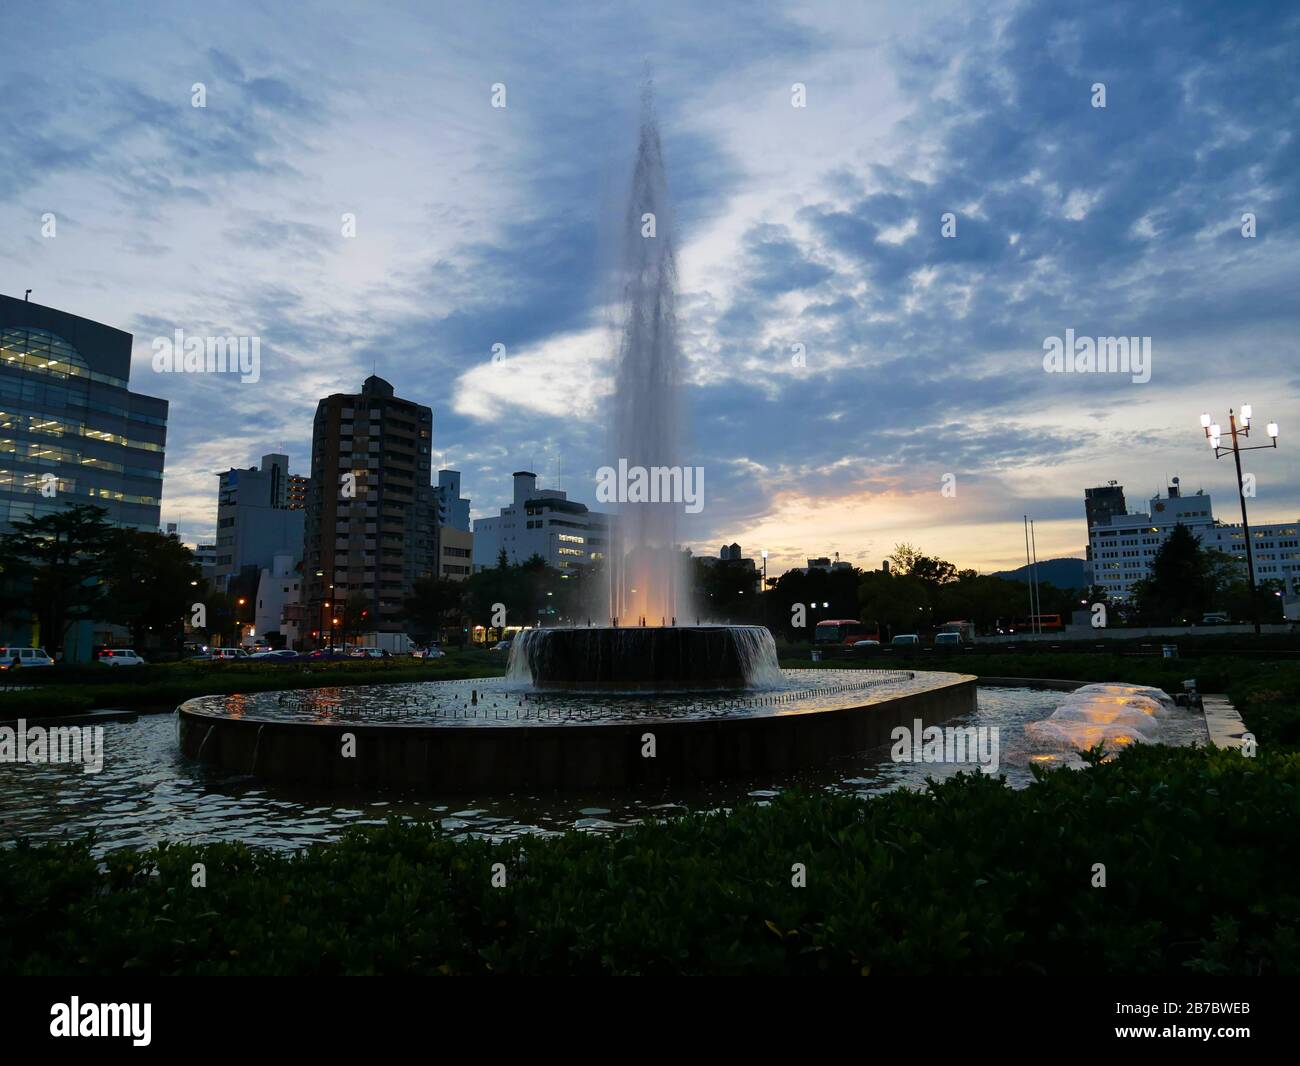 Illuminated fountain in Japanese park at night, cloudy filled sky in background sets the mood Stock Photo